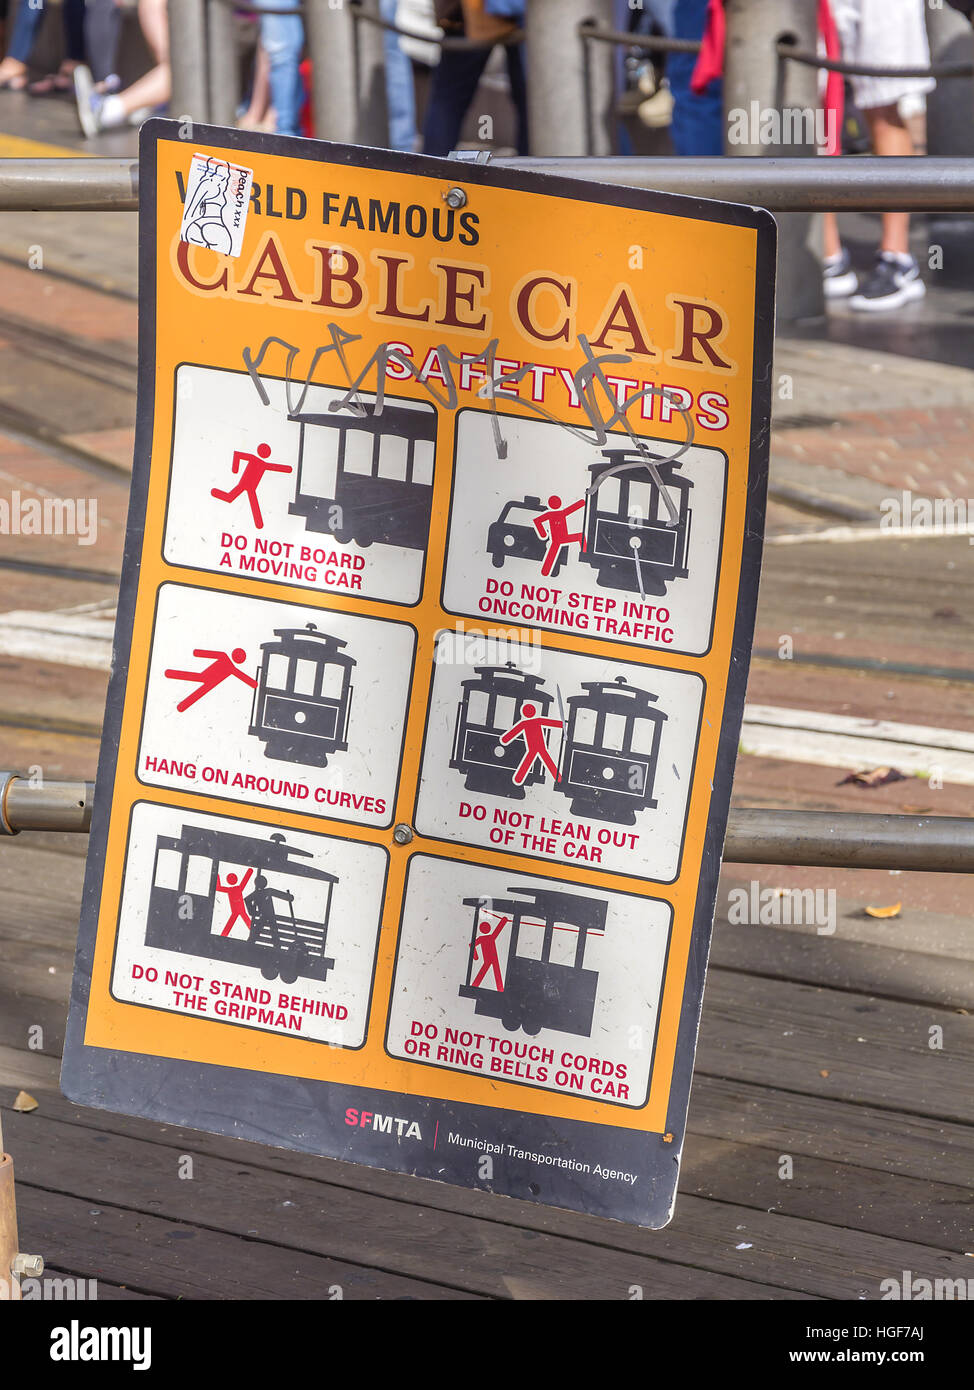 Cable car safety tips Stock Photo